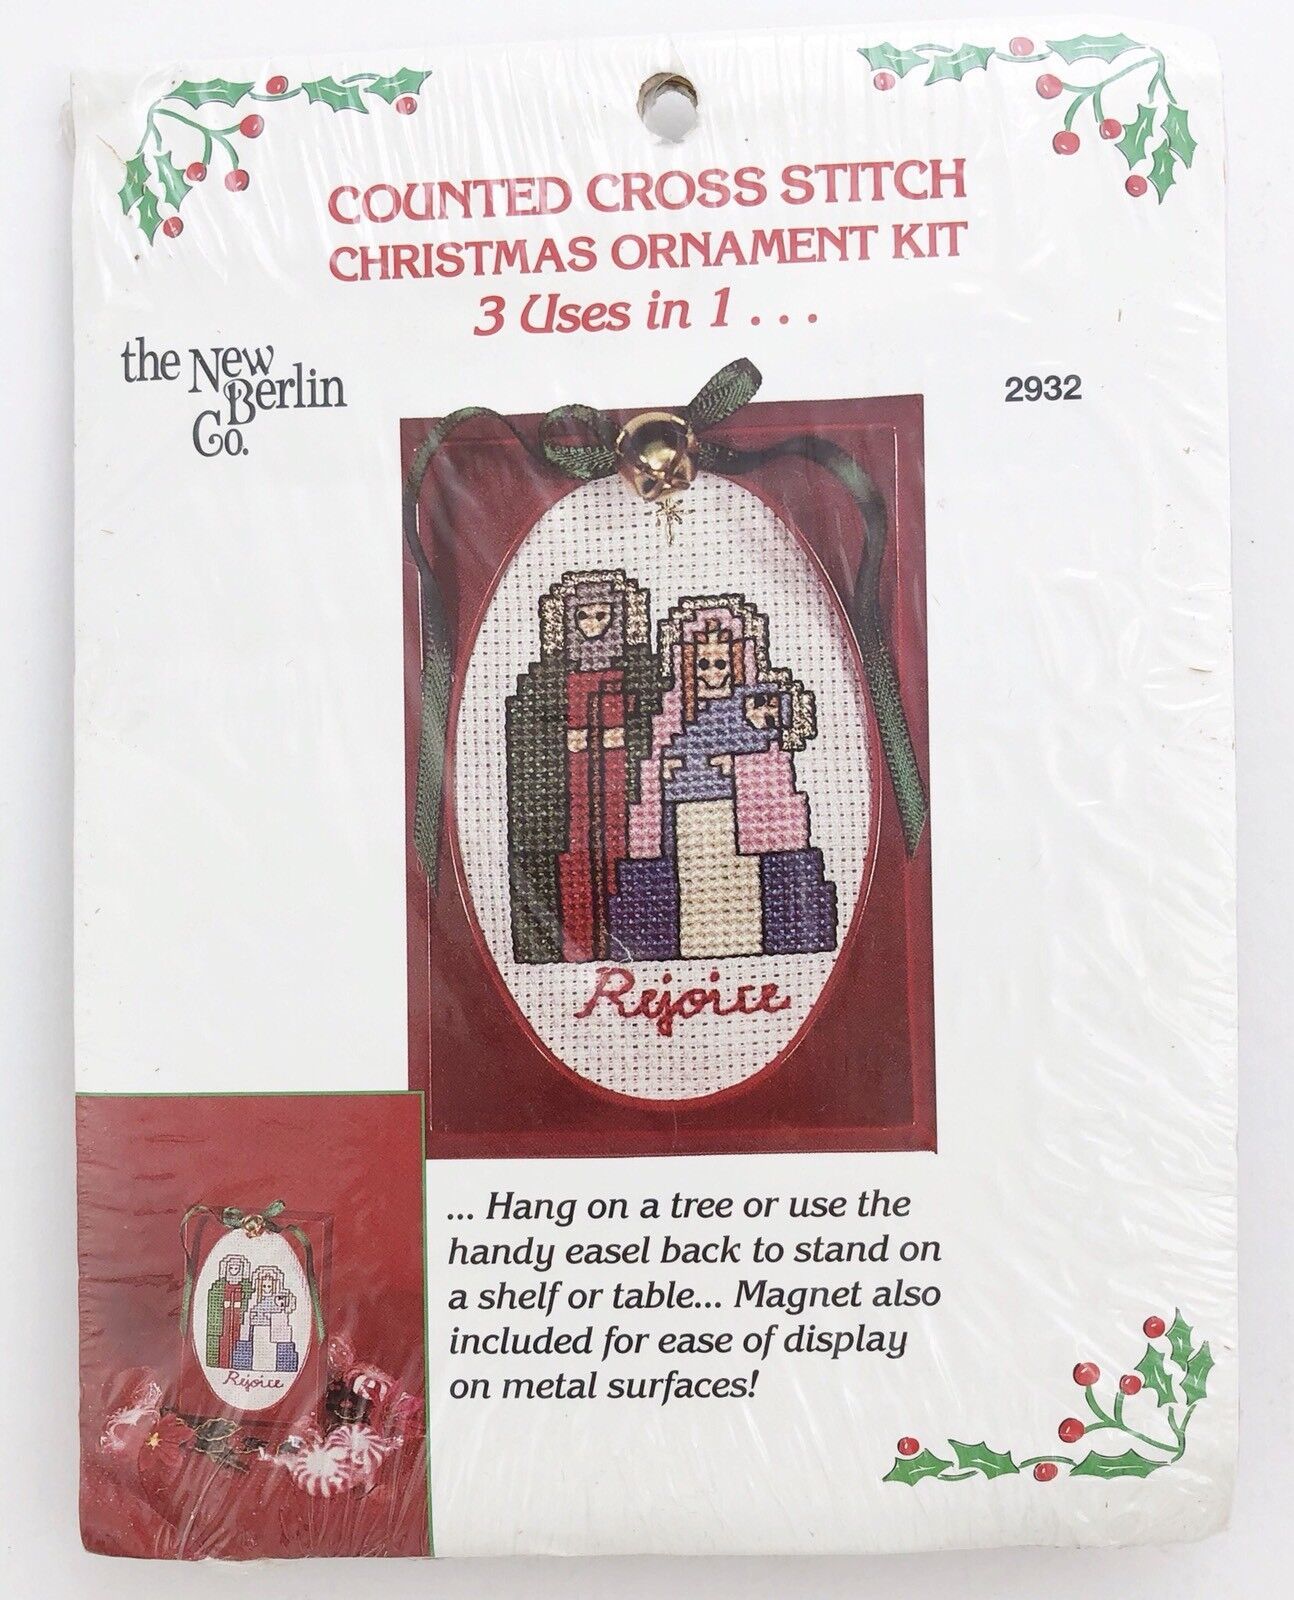 Vintage Counted Cross Stitch Kit Holy Family Christmas Ornament New Berlin Co  - $14.59